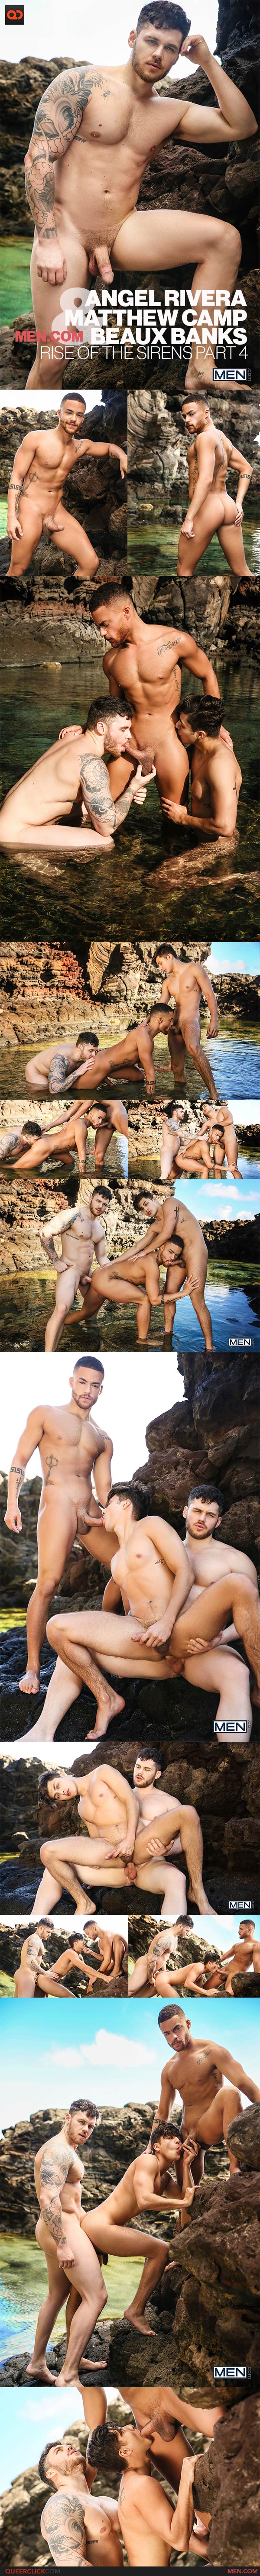 Men.com: Beaux Banks, Matthew Camp and Angel Rivera - Rise Of The Sirens Part 4